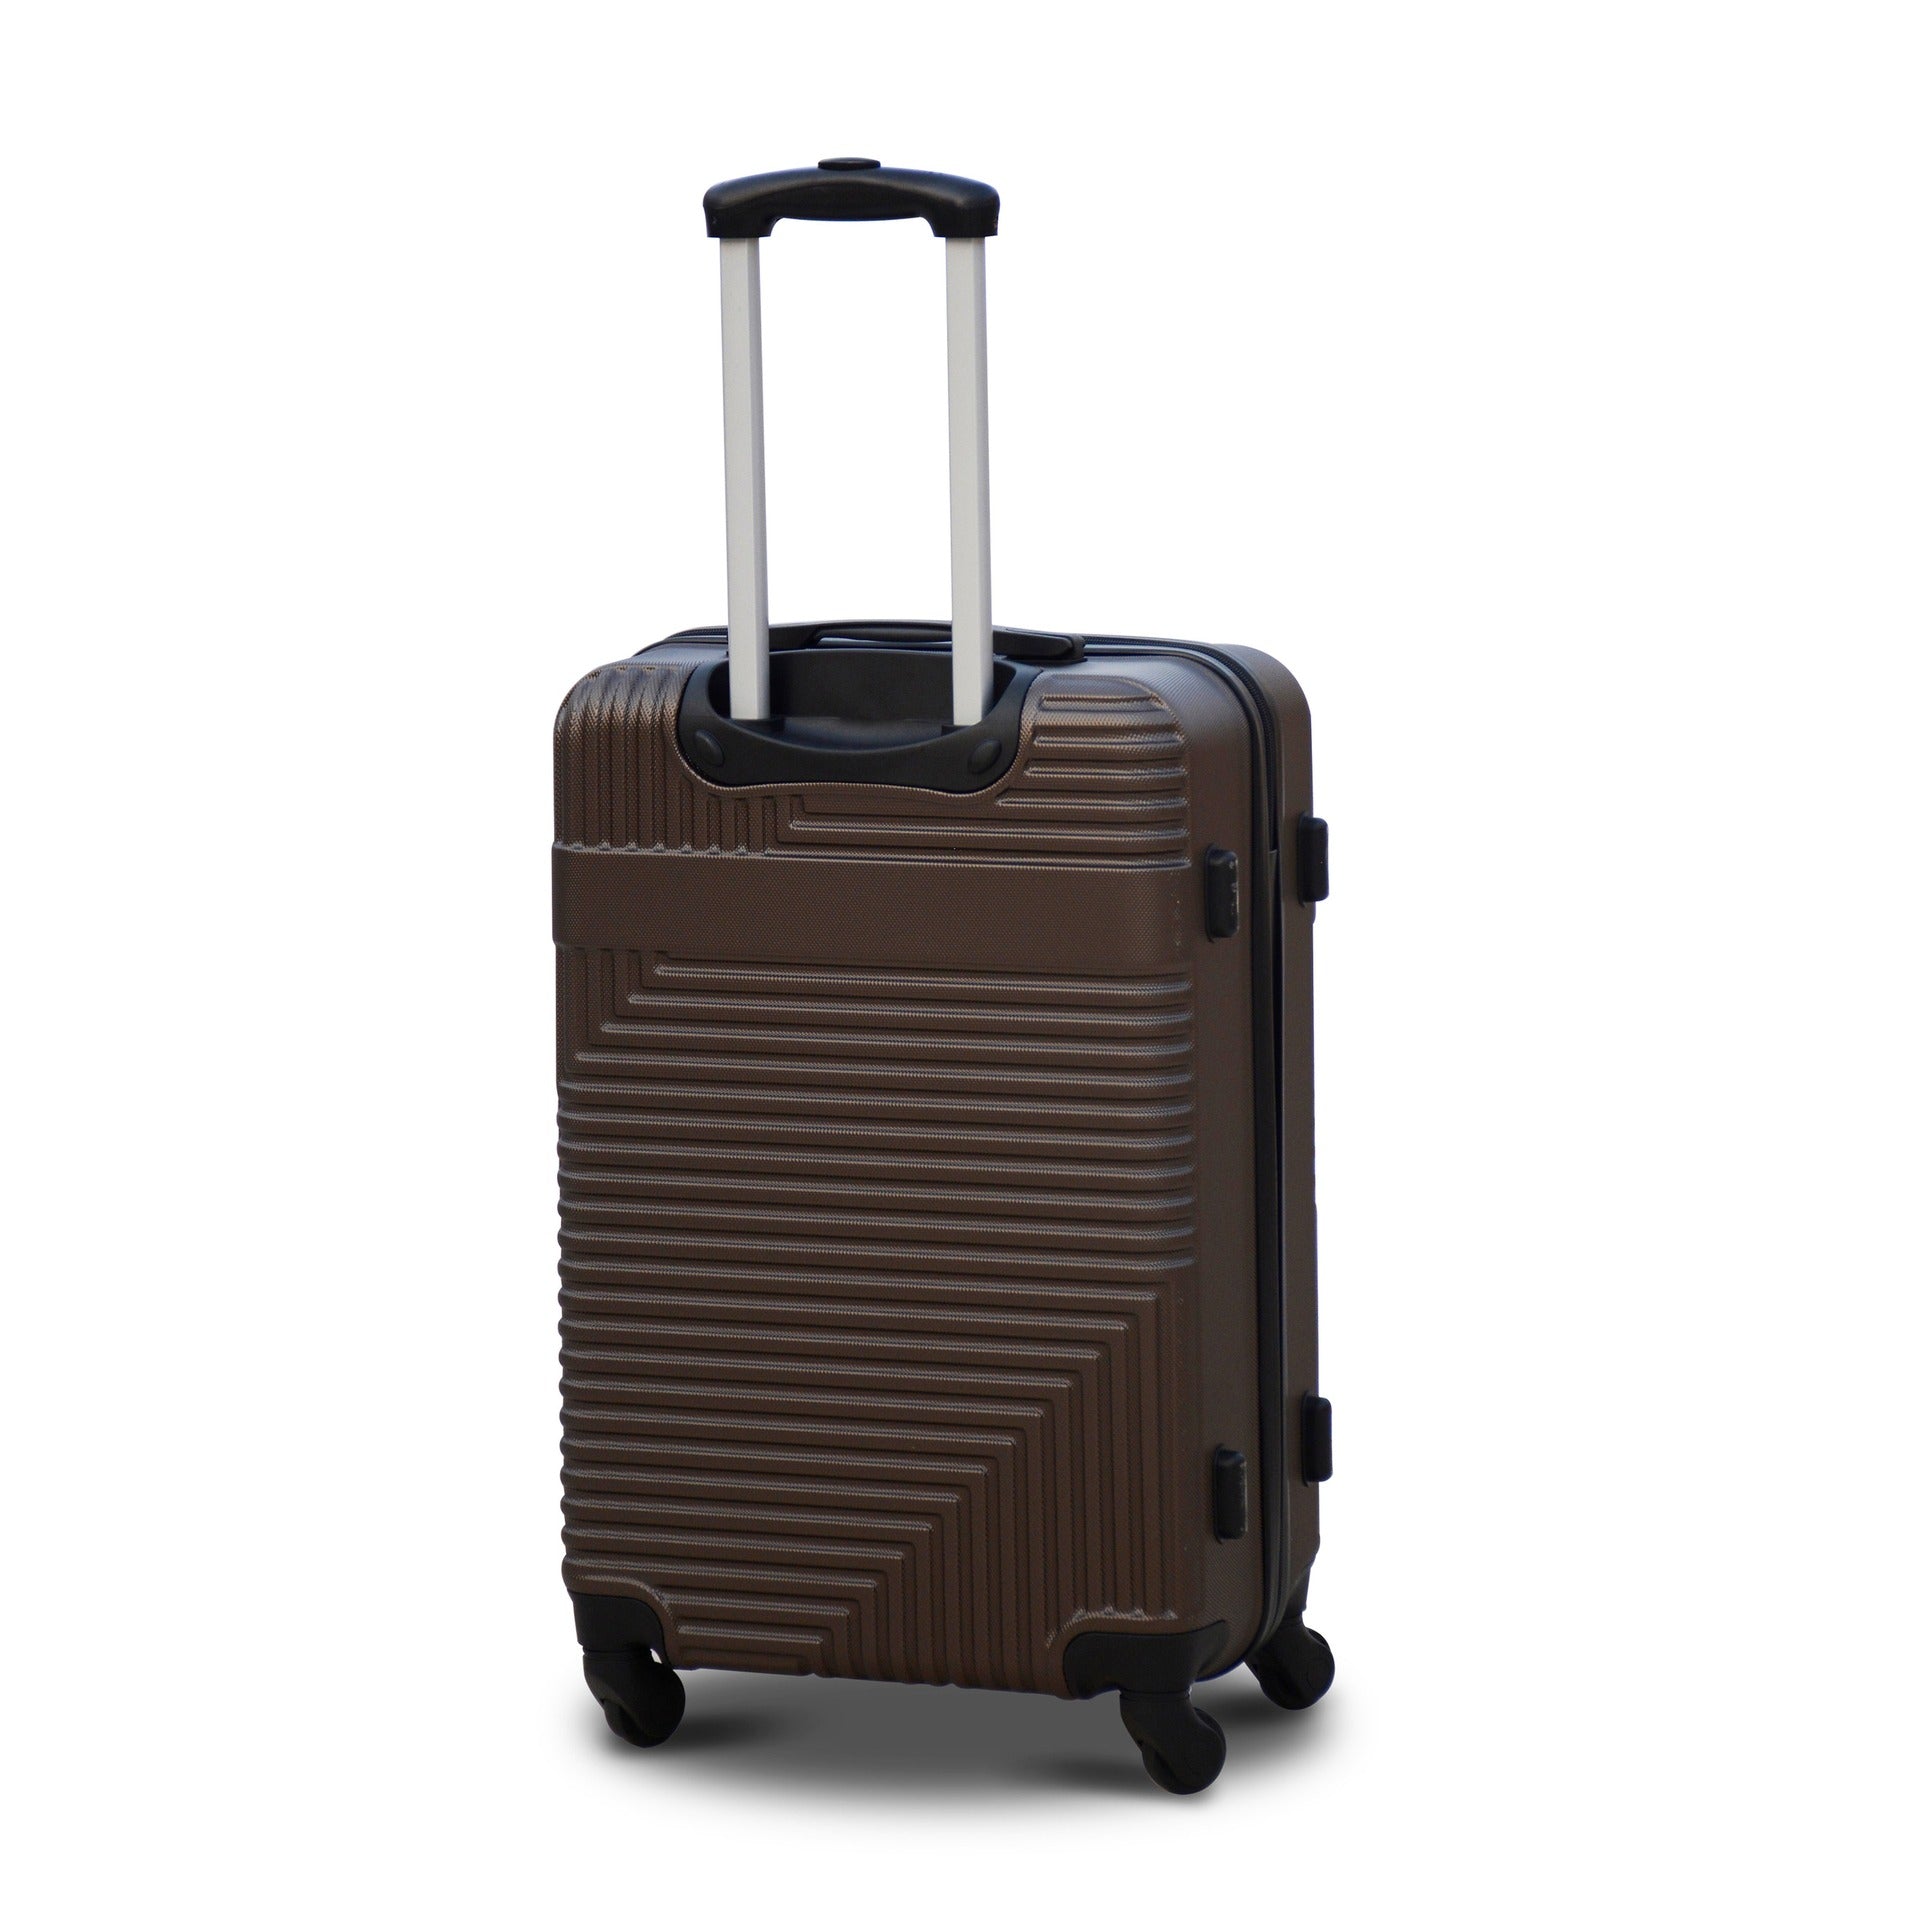 24" Brown Colour Travel Way ABS Luggage Lightweight Hard Case Spinner Wheel Trolley Bag